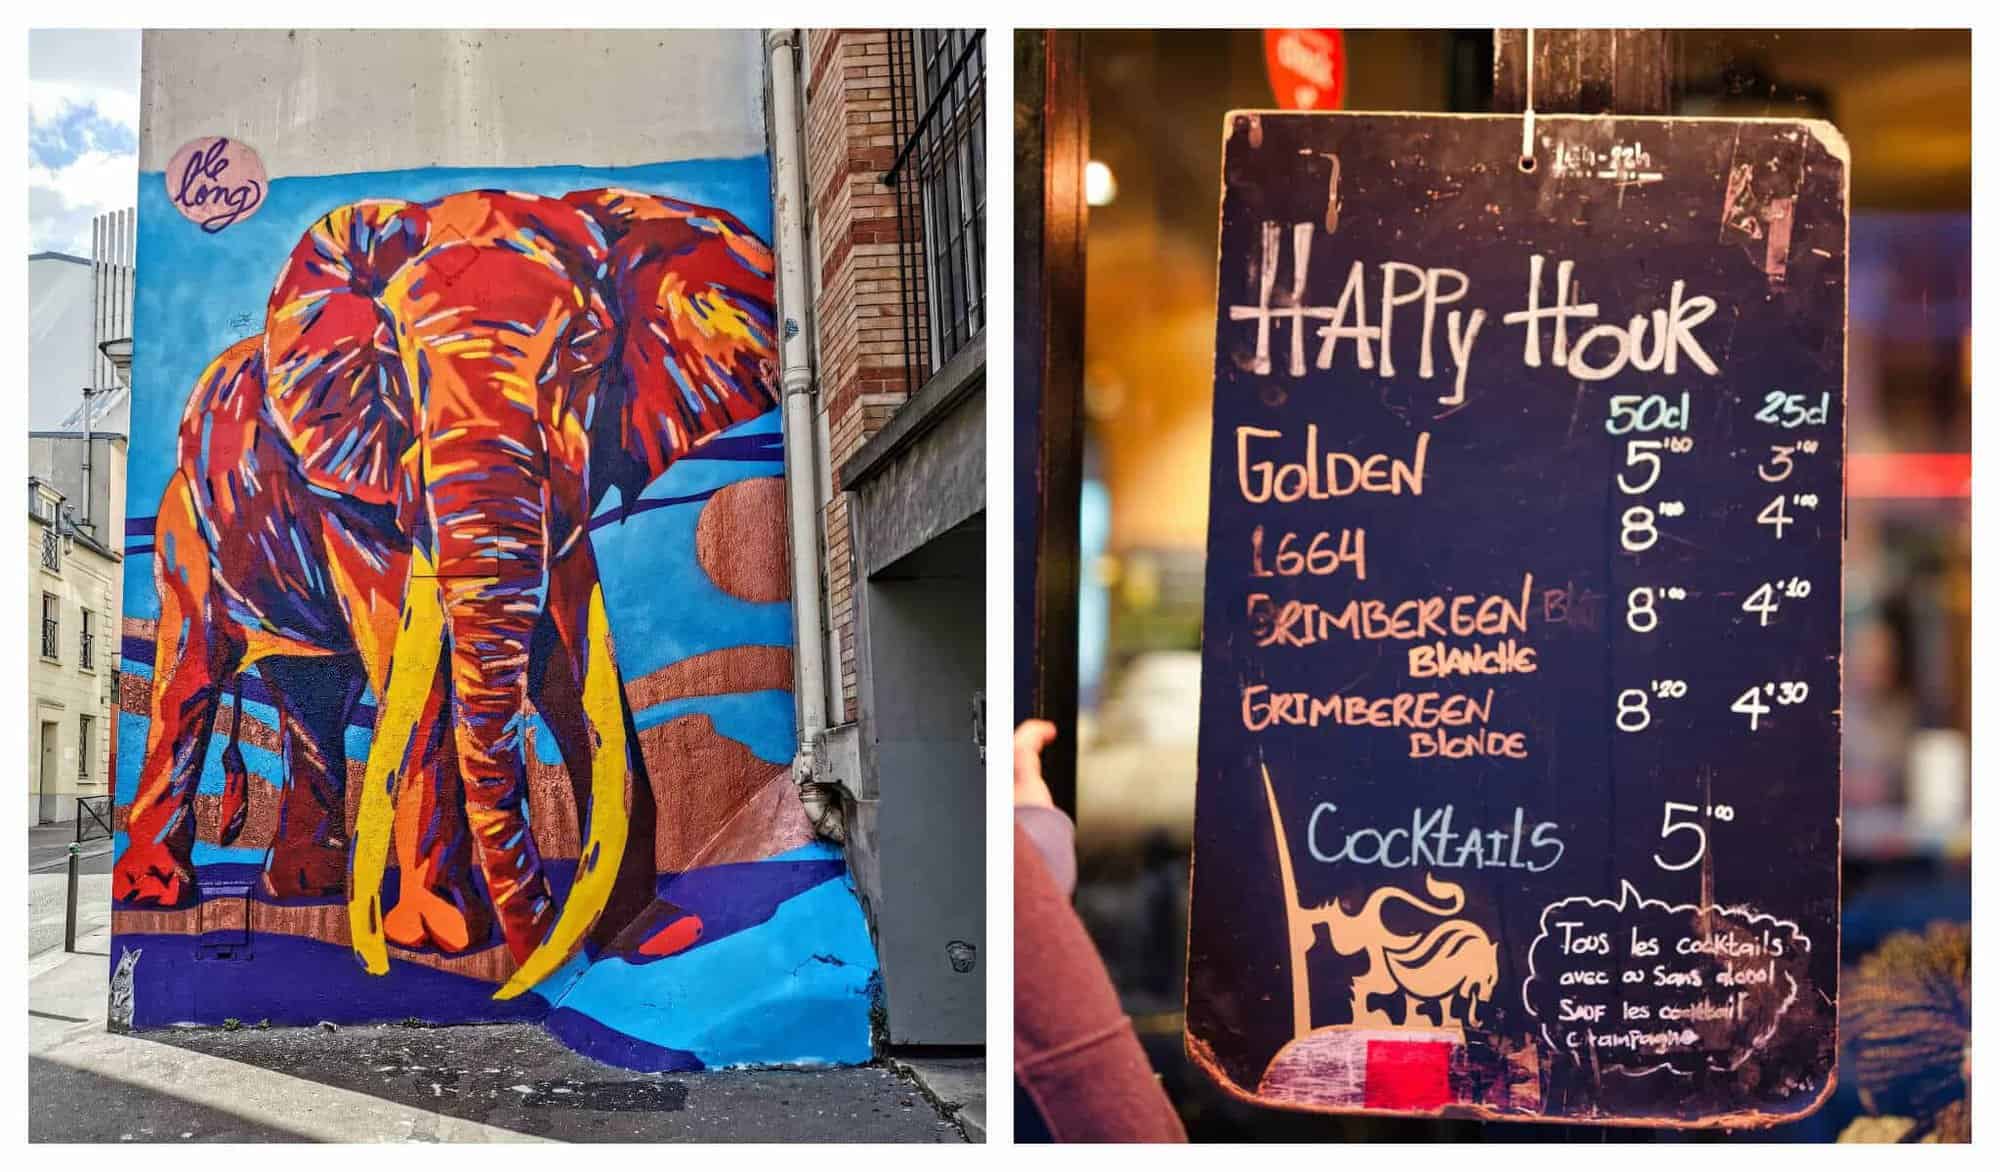 Left: A wall art of an elephant in shades of blue and red. Right: A blackboard for happy hour in a bar.